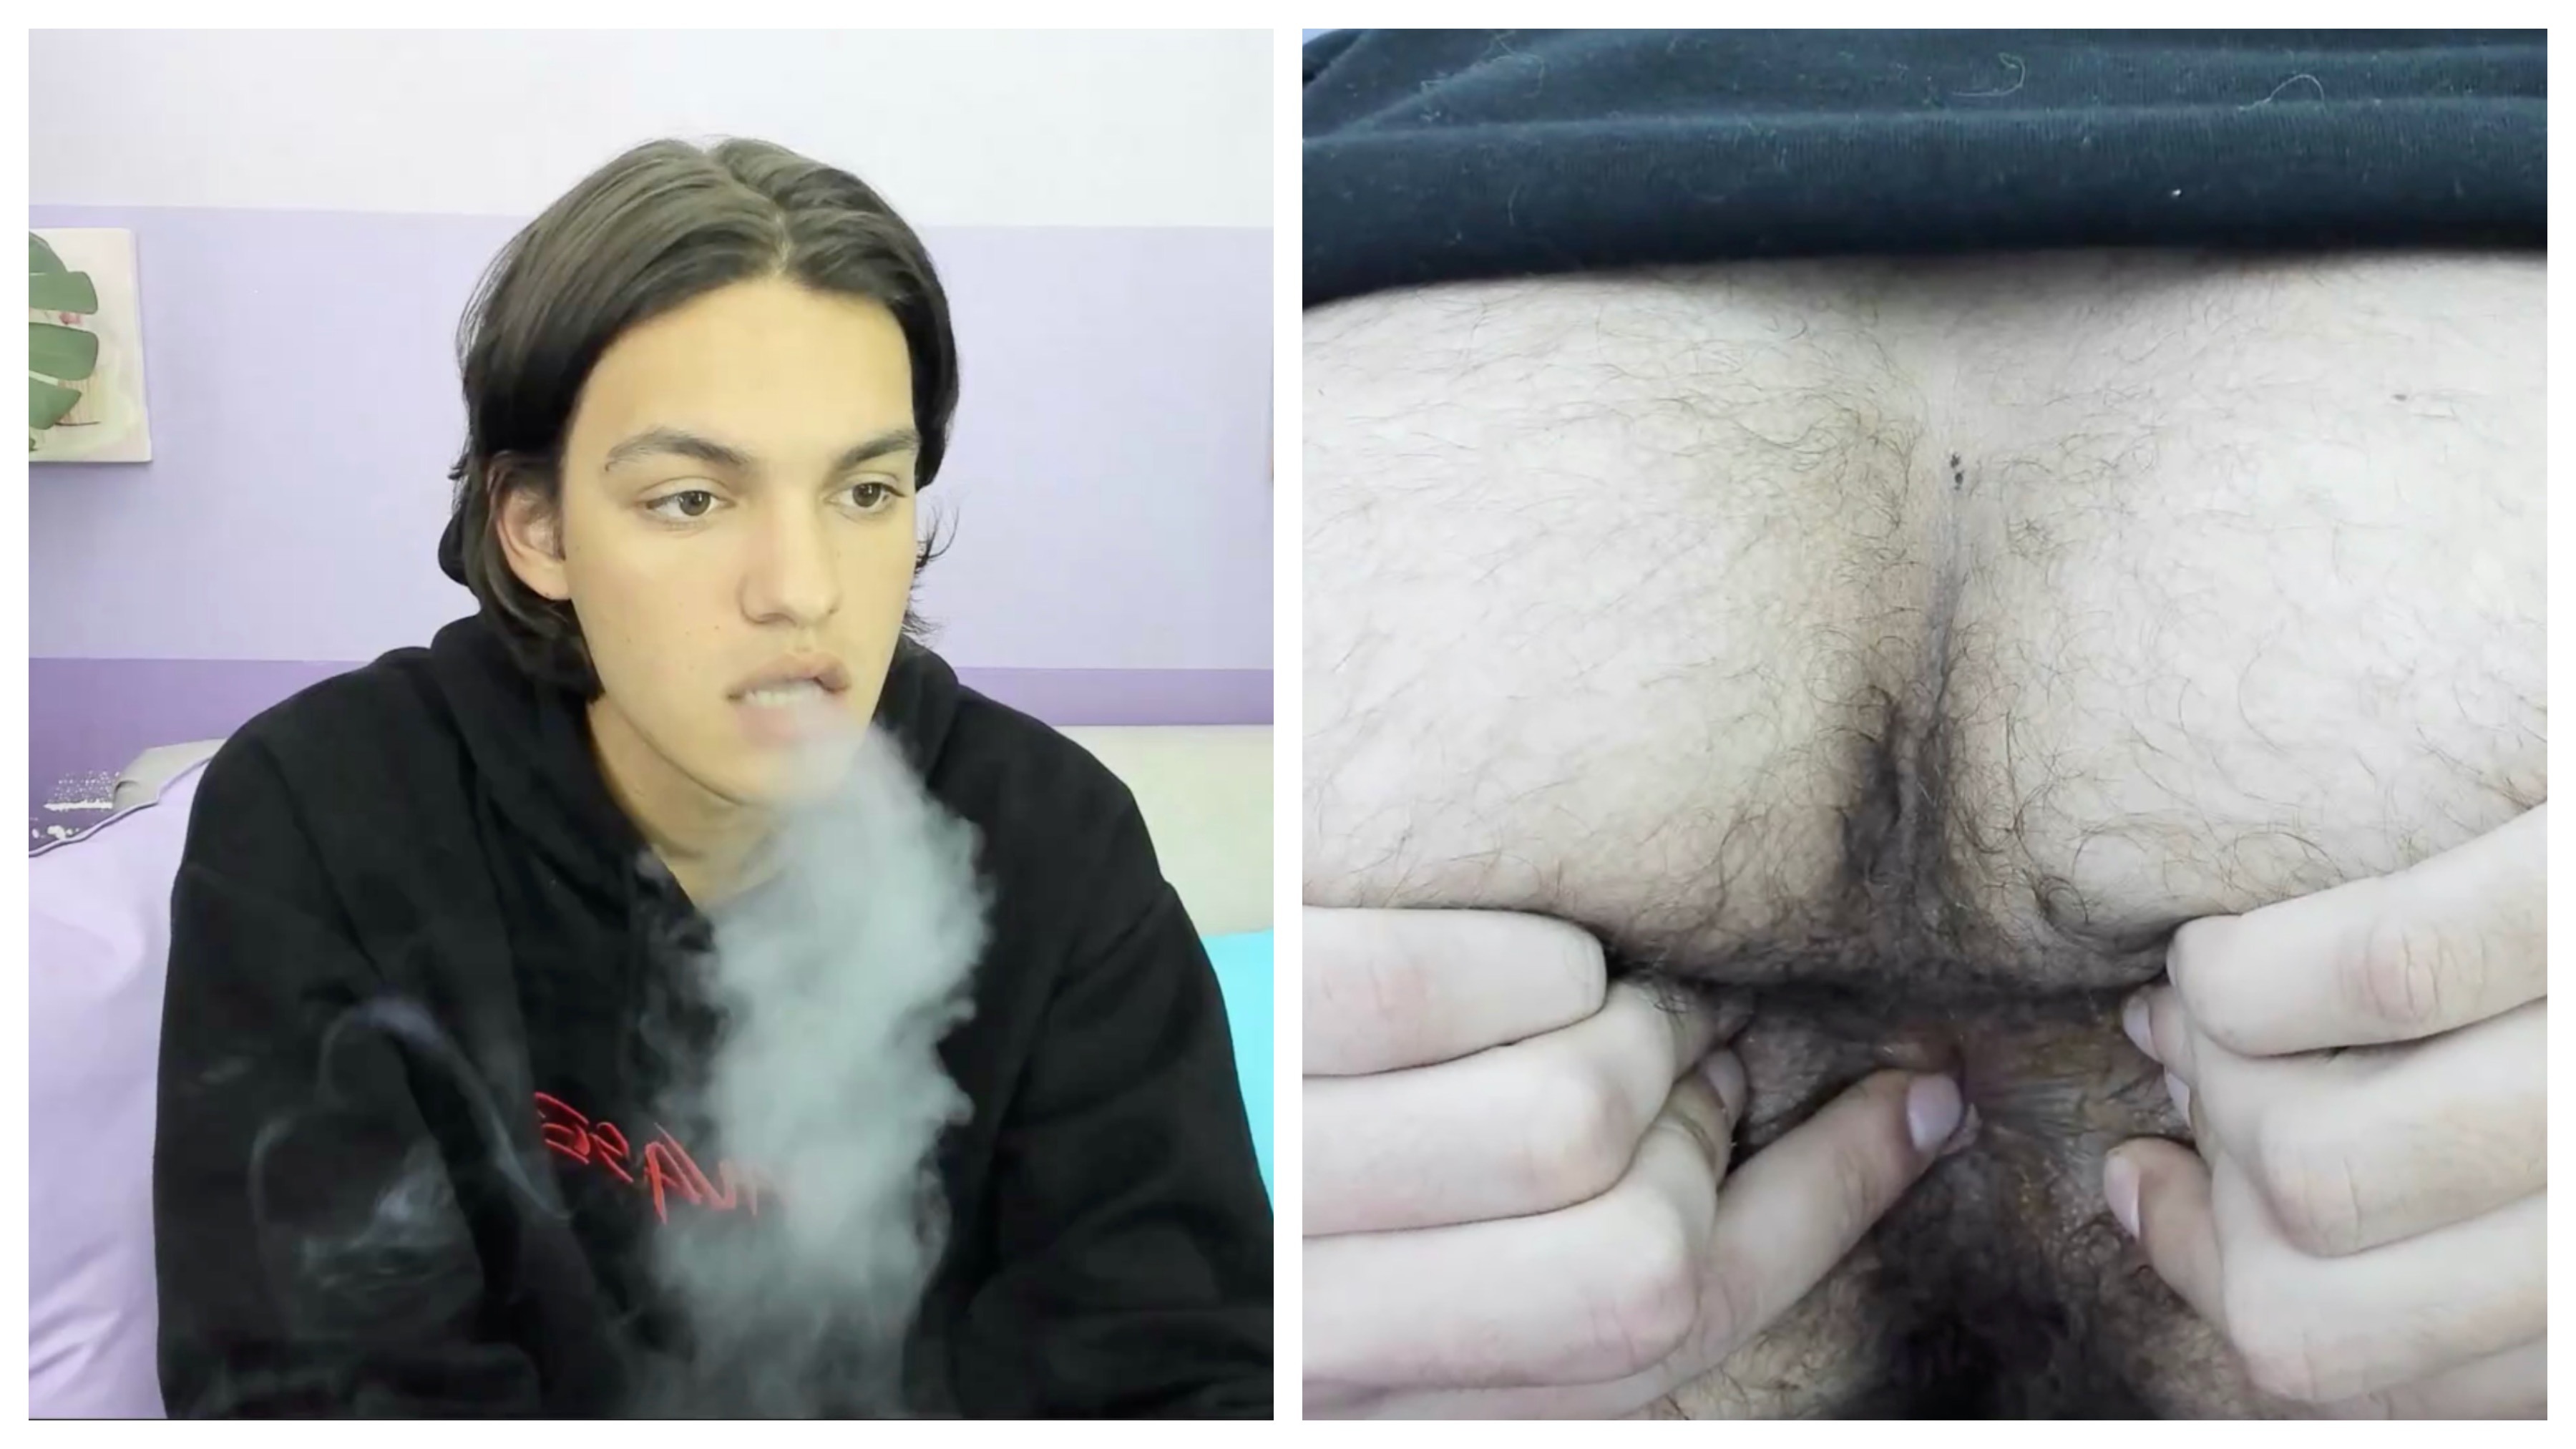 ORDERED smoking and sniffing his very dirty hole!